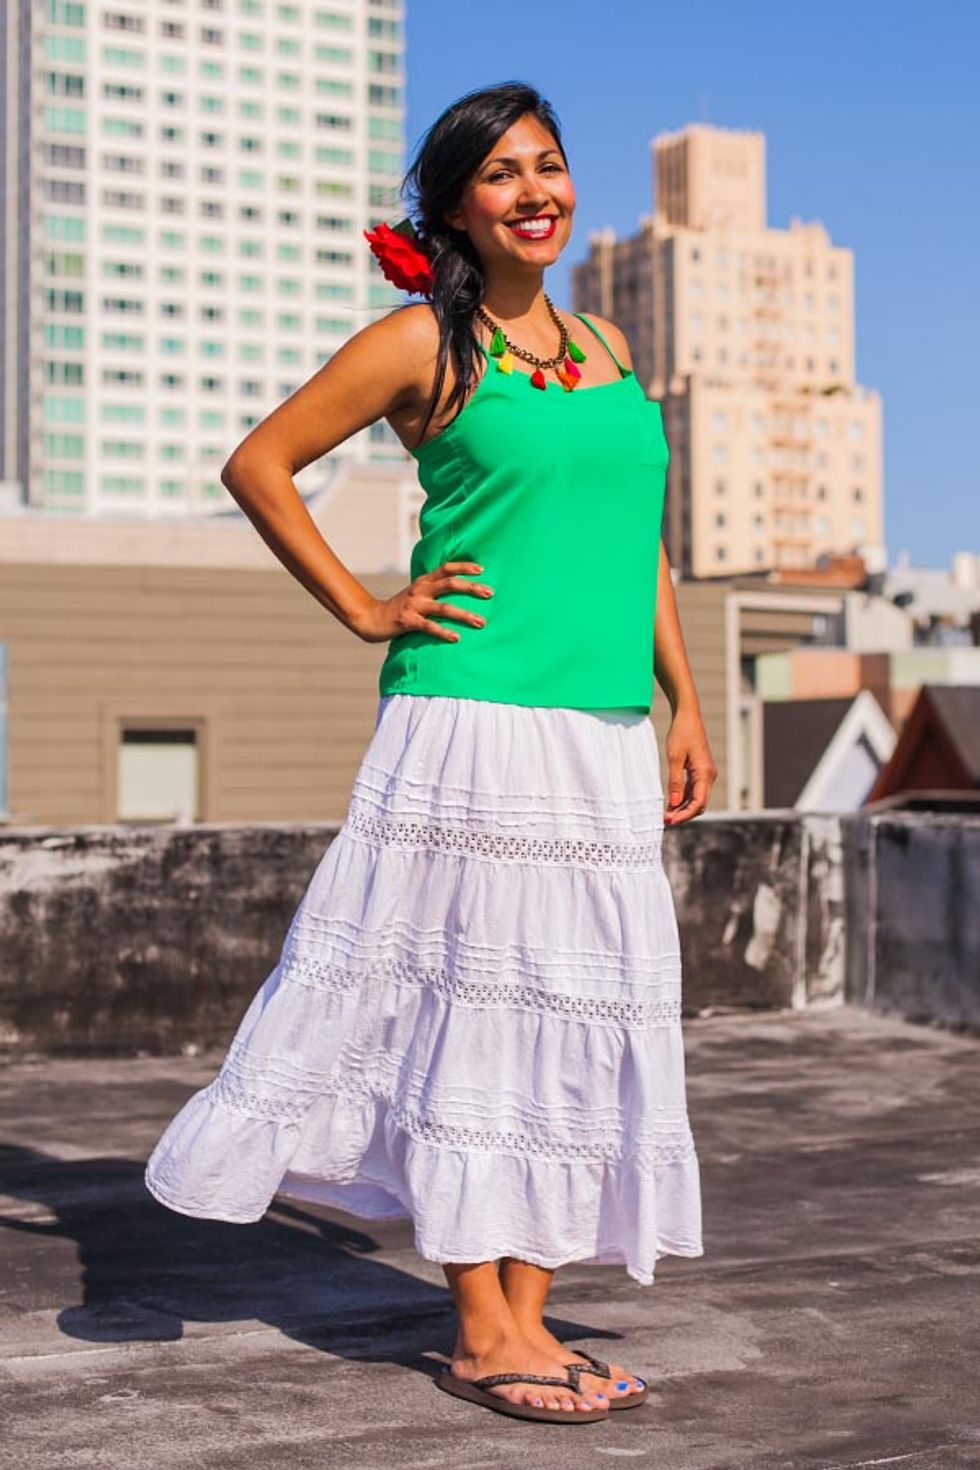 SF Street Style: A Colorful Cinco de Mayo Look on Russian Hill